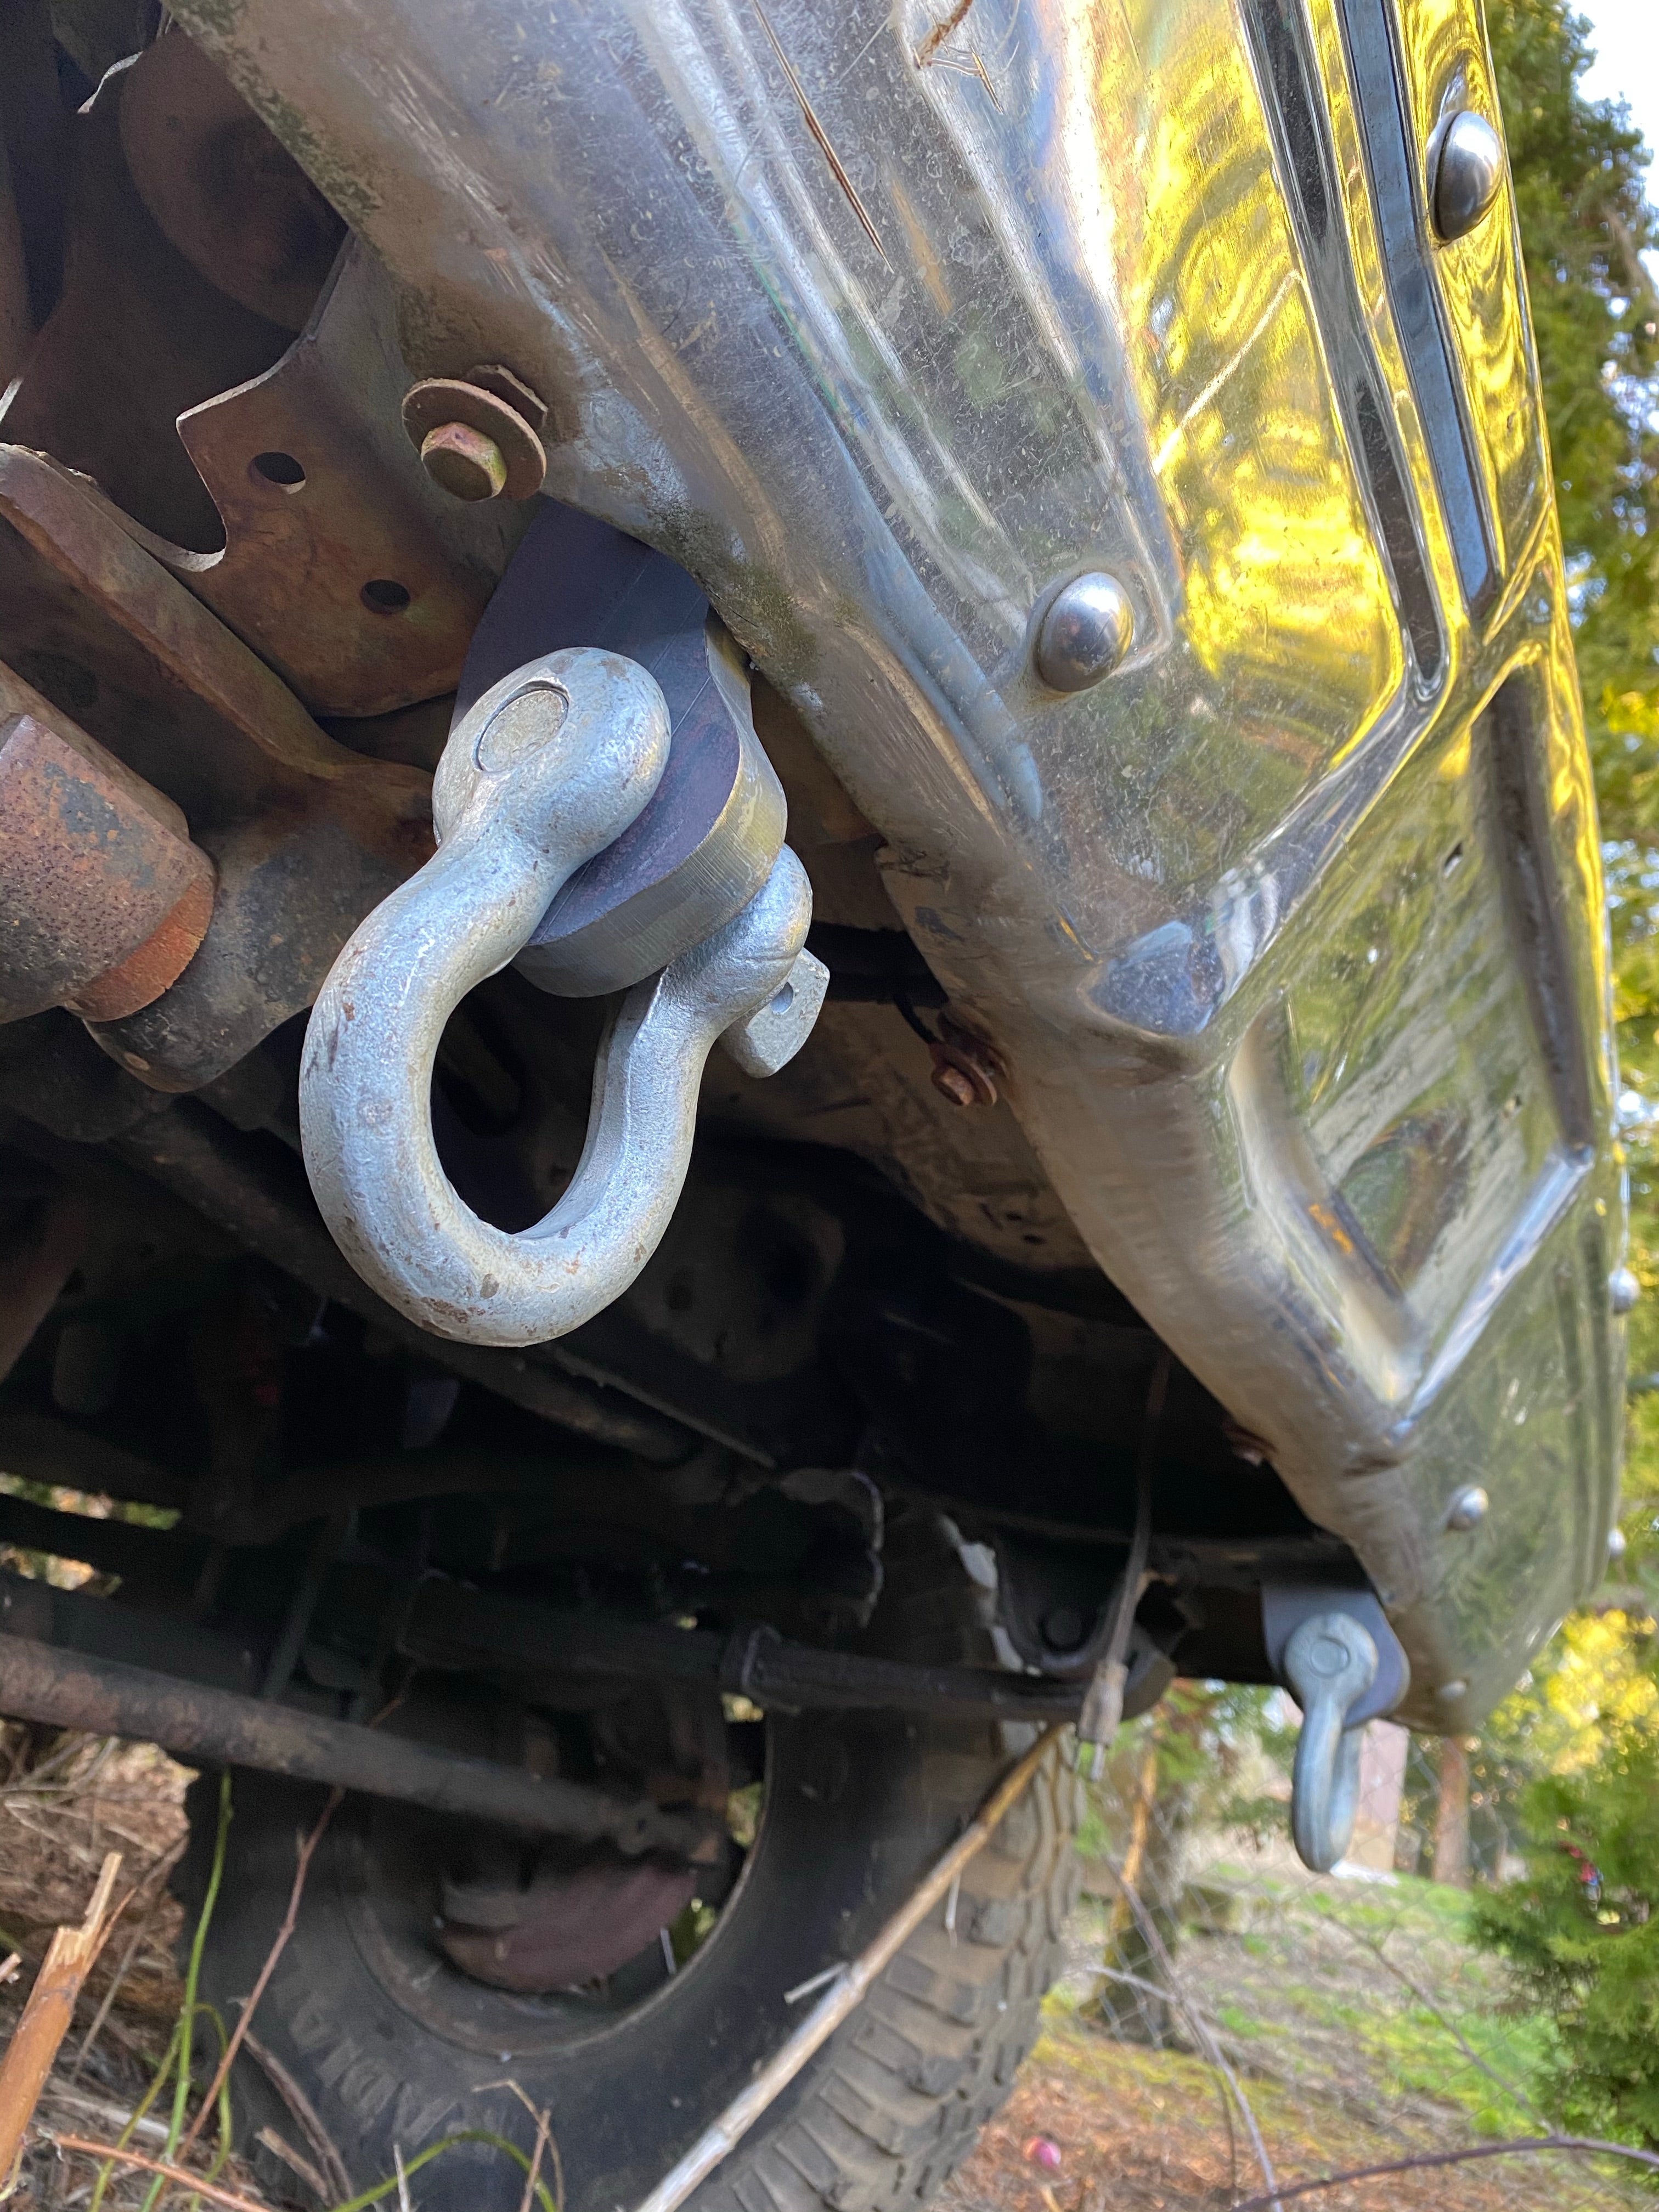 1981-1987 (-'91 K5/Sub/Crew) GM truck Shackle Bracket tow hooks | Engineered Vintage | Custom Winch Mounts & Recovery For Classic Trucks